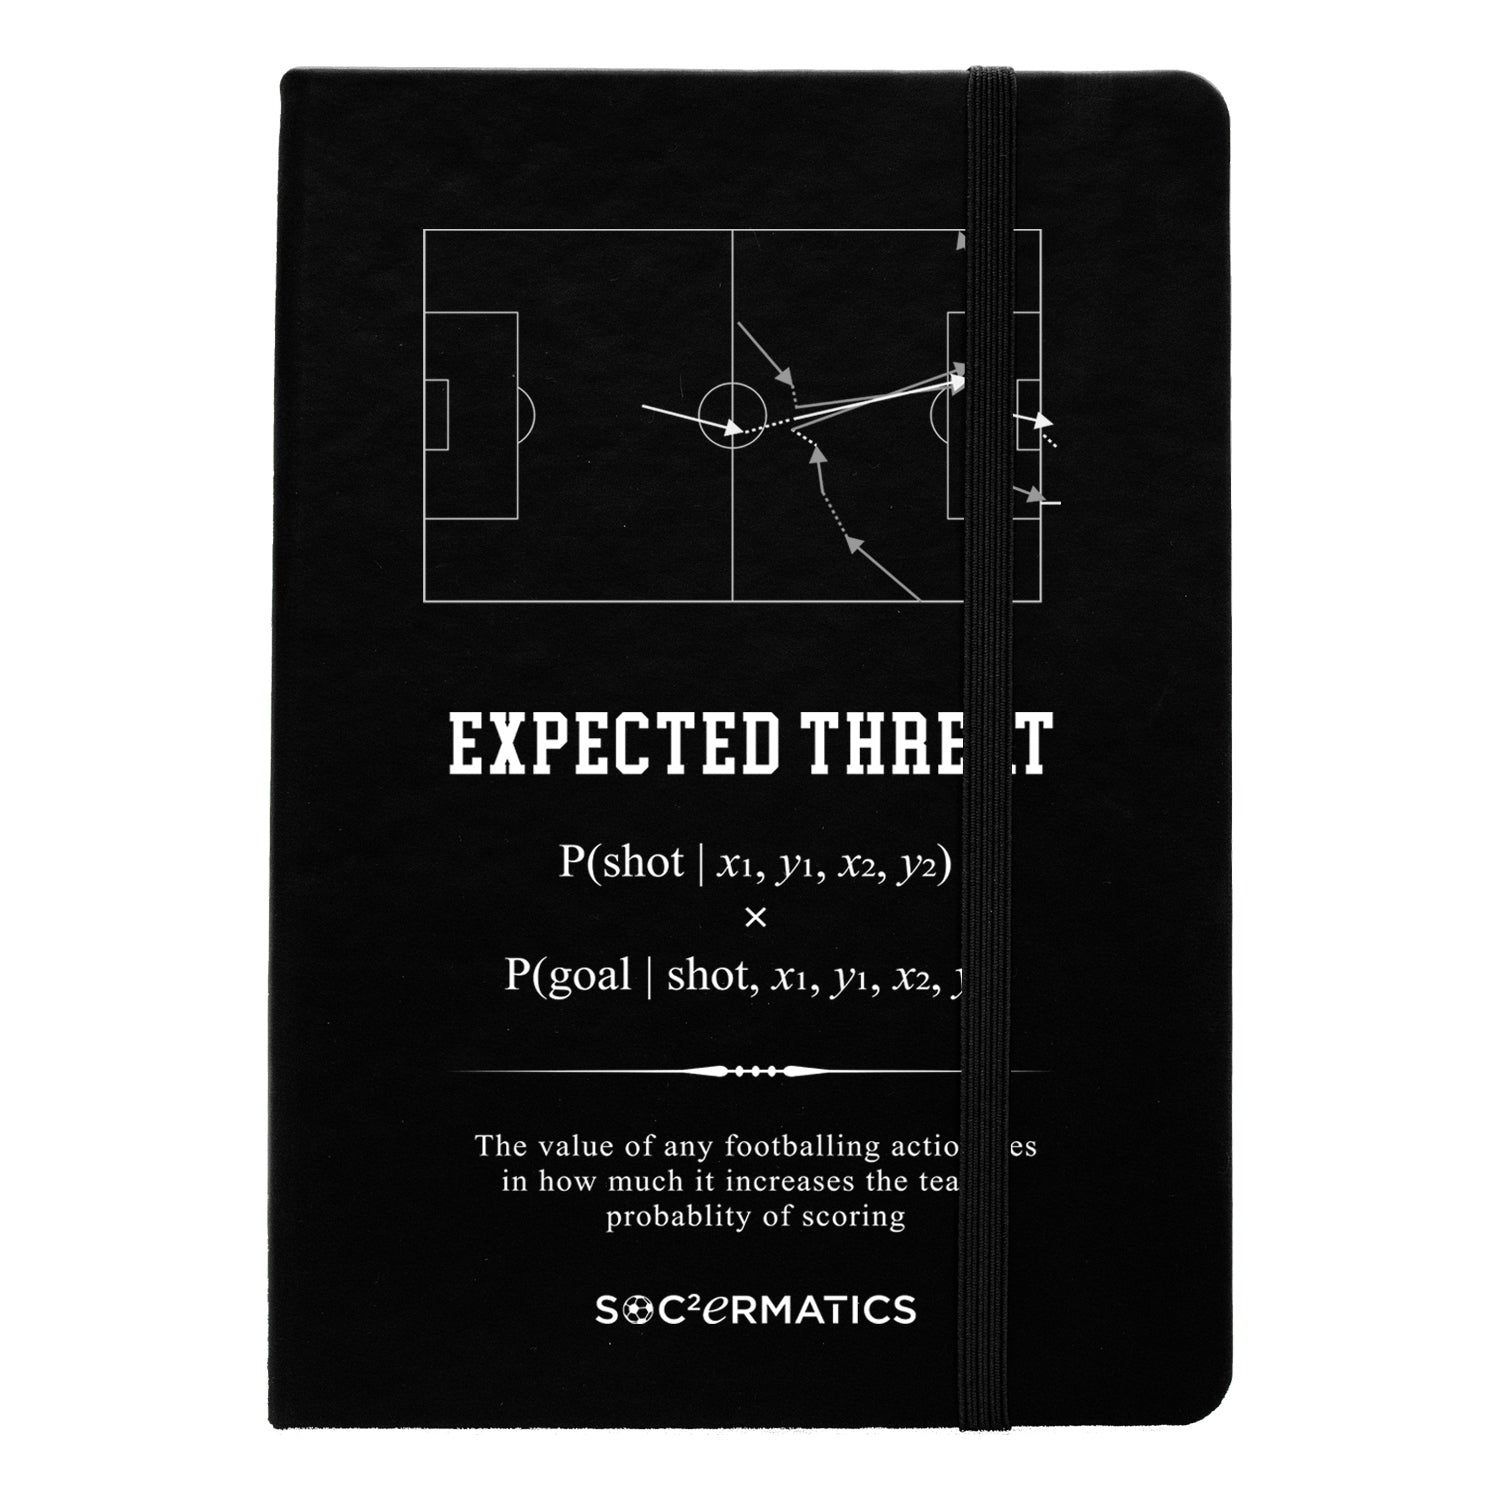 Expected Threat - Soccermatics - Notebook